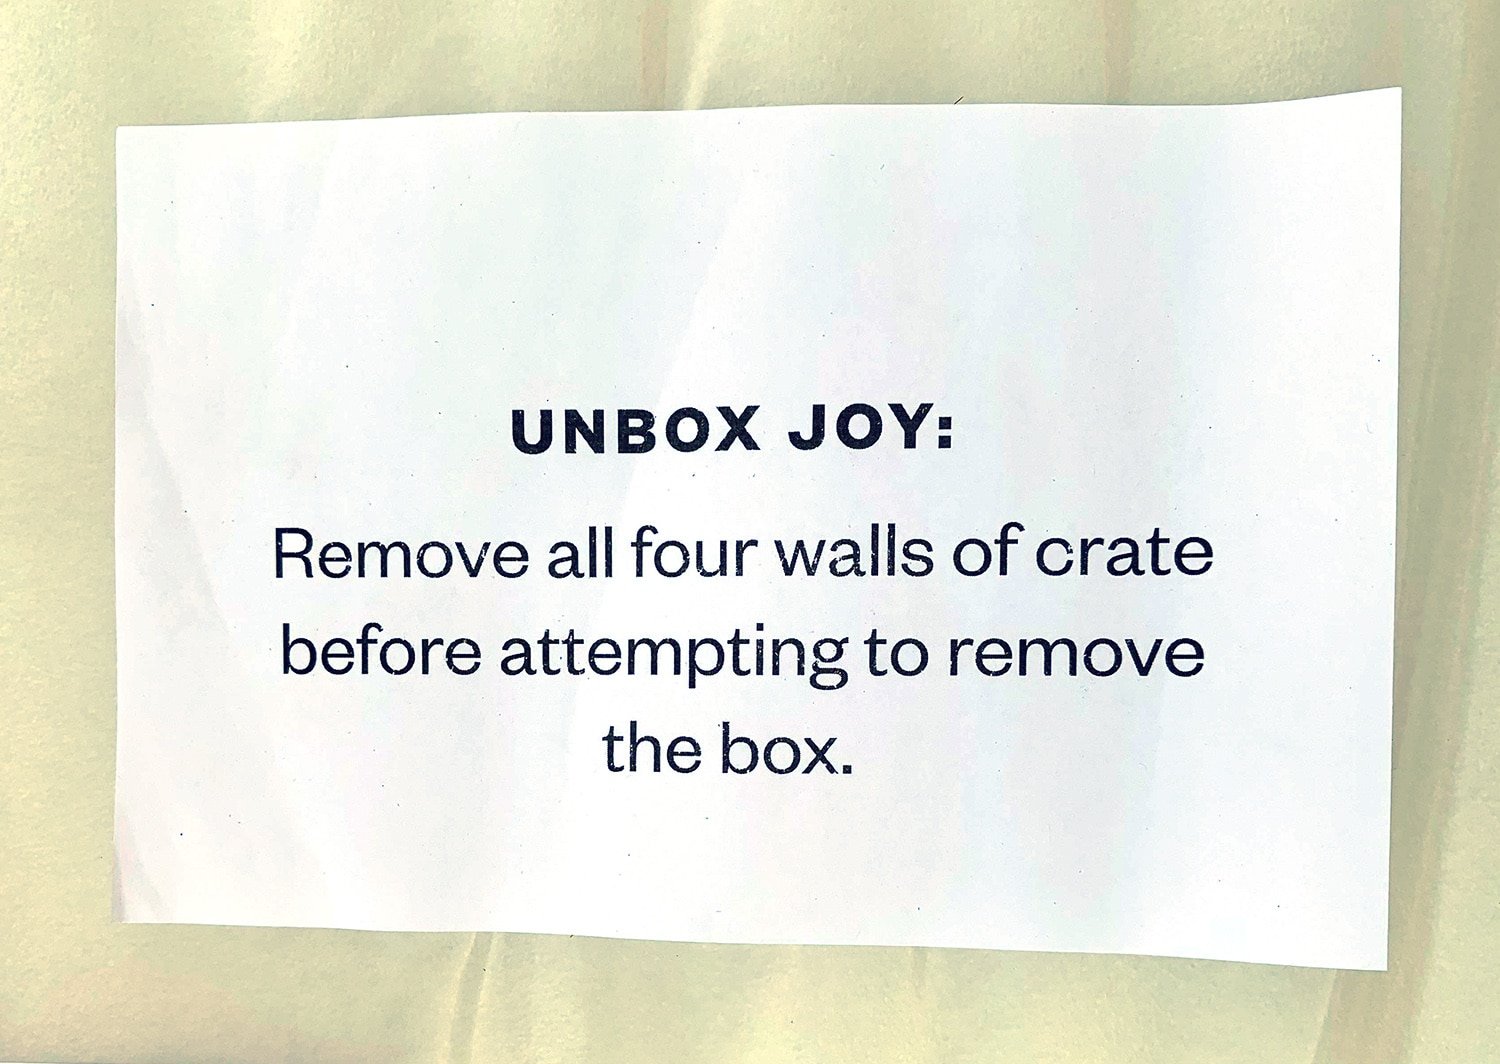 piece of paper reads unbox joy: remove all four walls of crate before attempting to remove the box